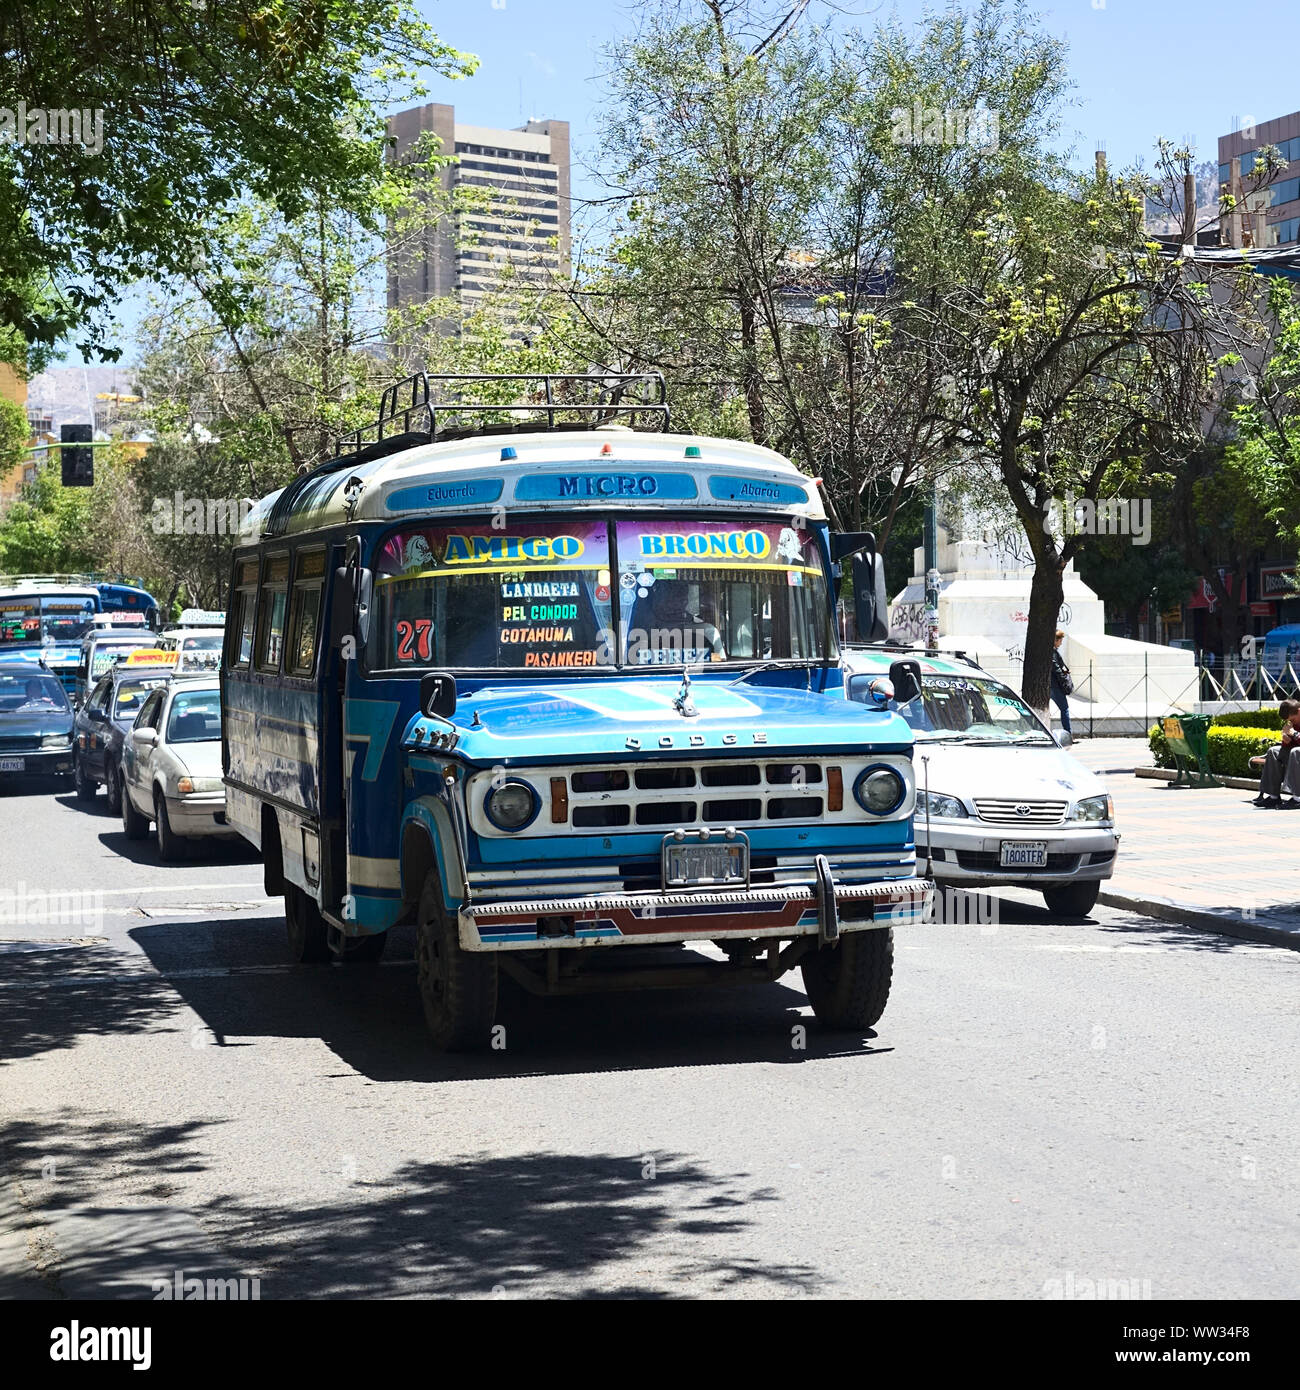 LA PAZ, BOLIVIA - OCTOBER 15, 2014: An old blue Dodge D400 bus used for public transportation driving on El Prado avenue in the city center Stock Photo